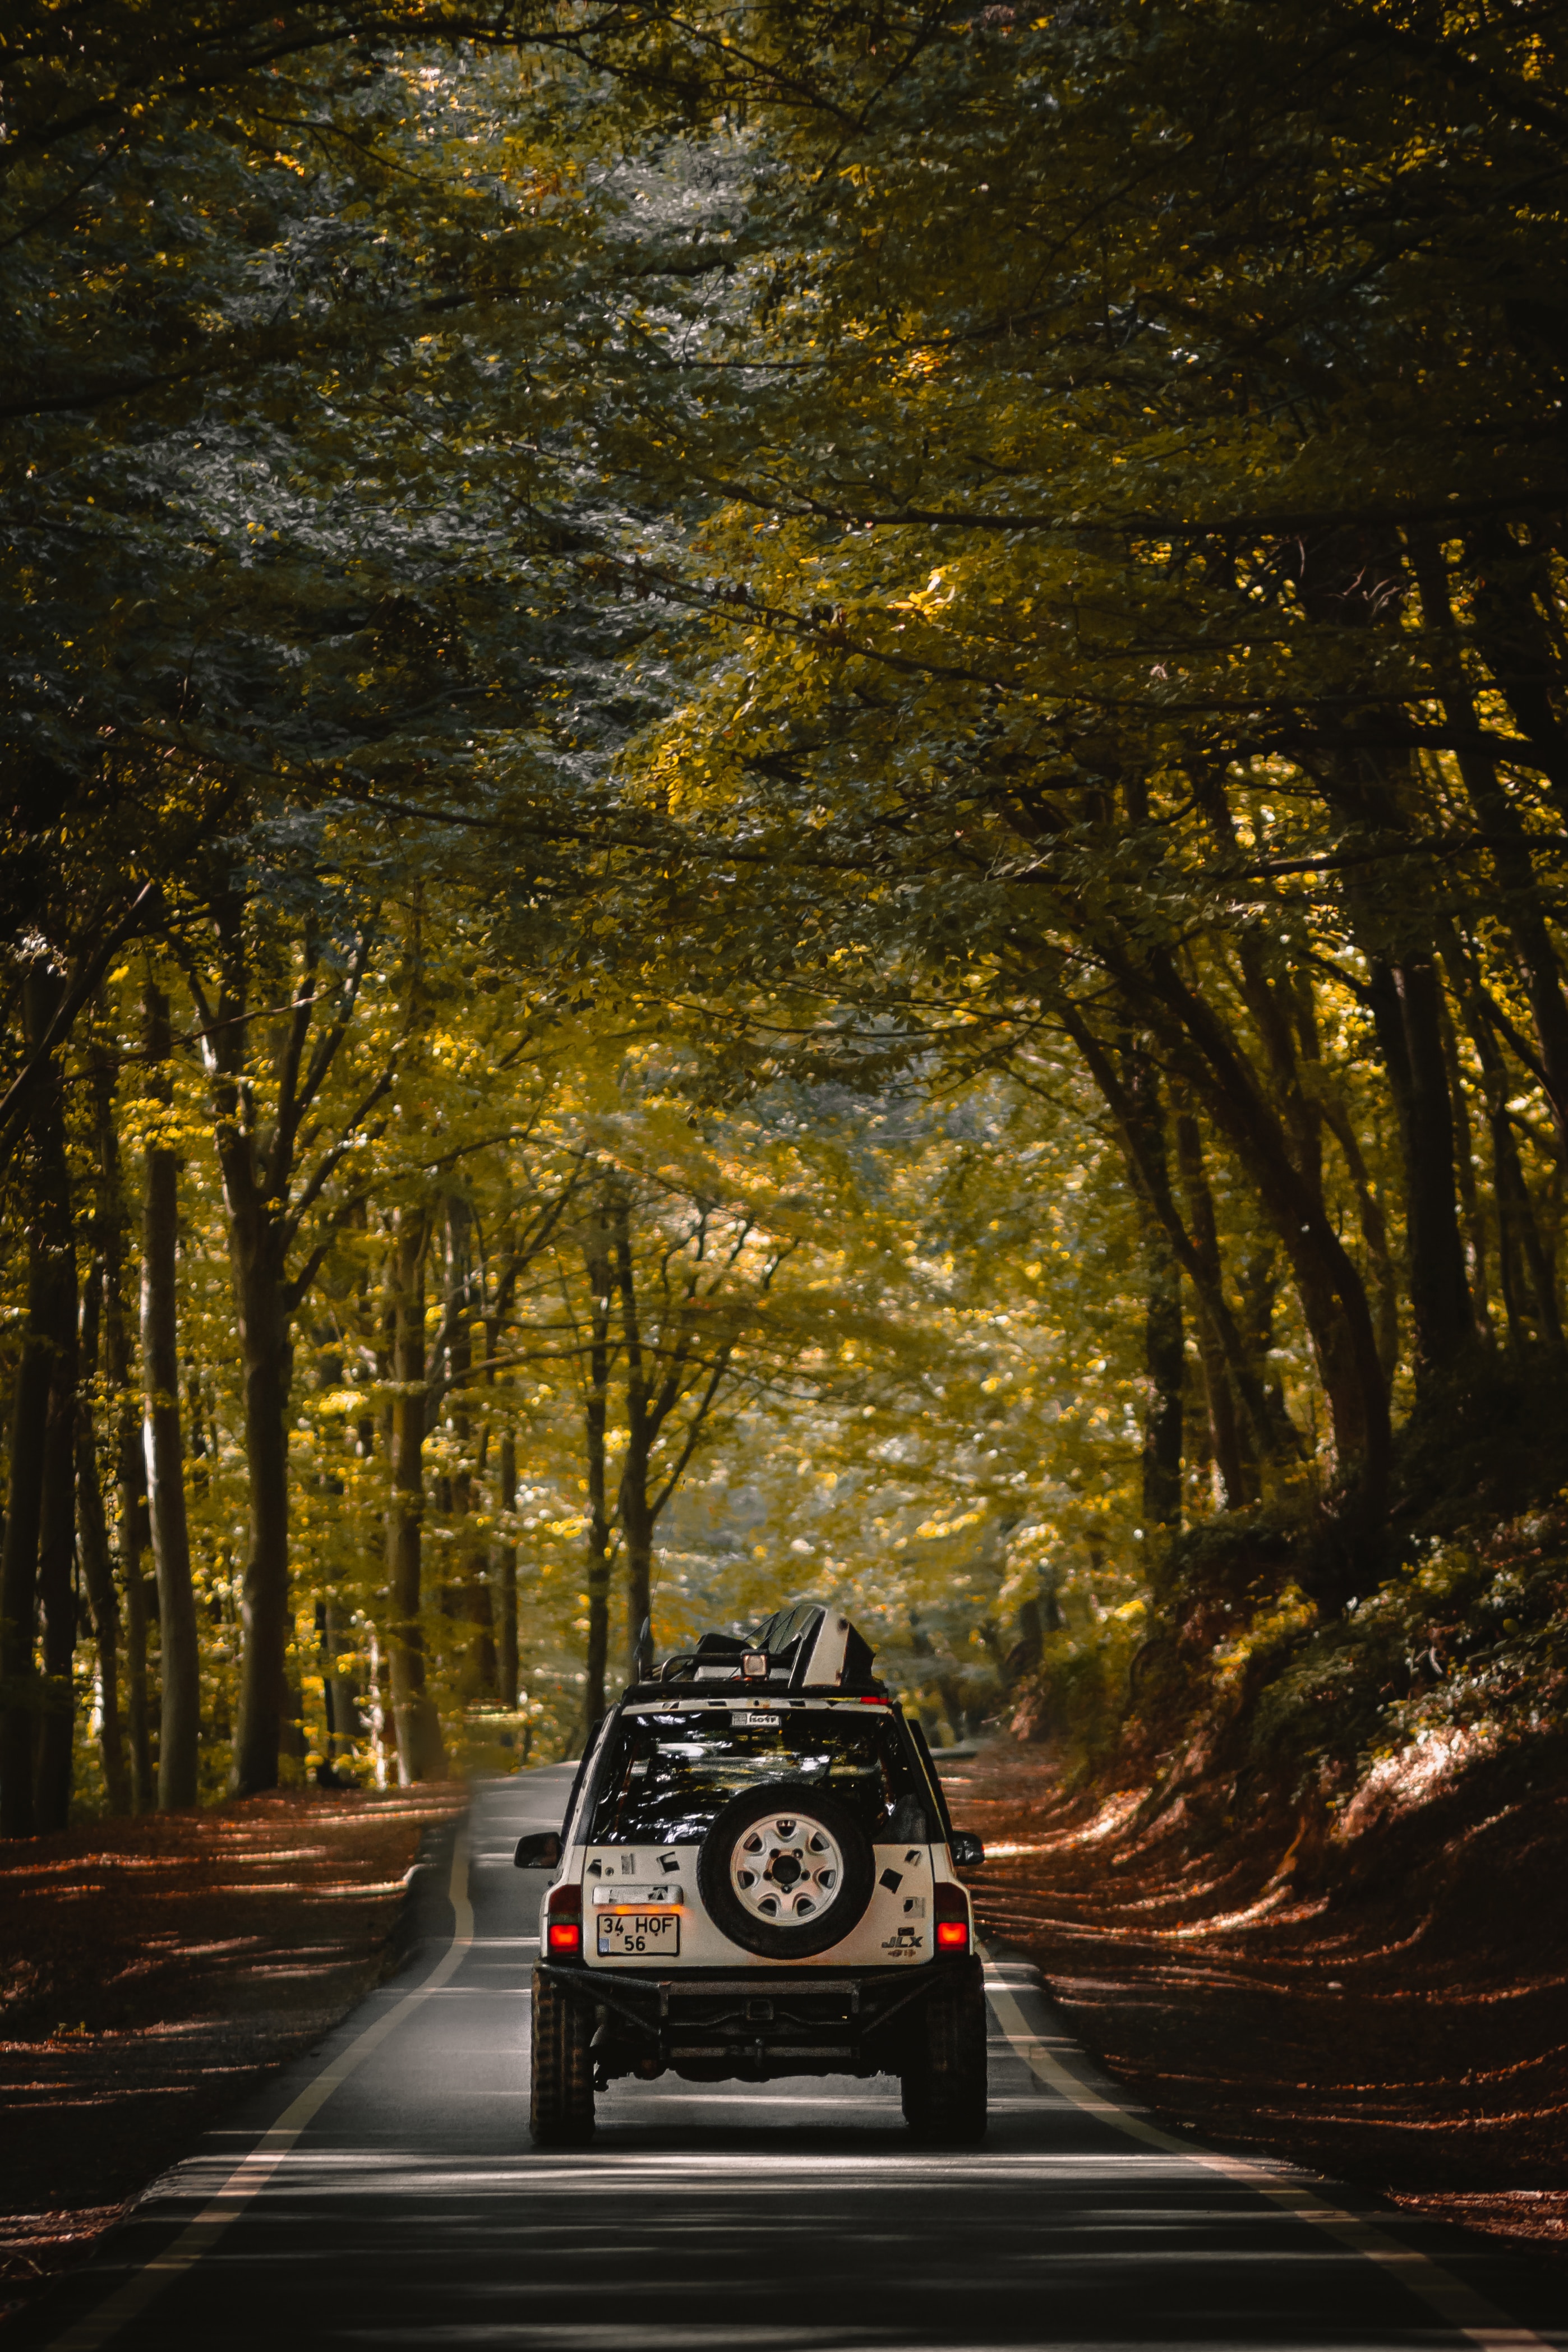 android cars, road, forest, car, suv, machine, journey